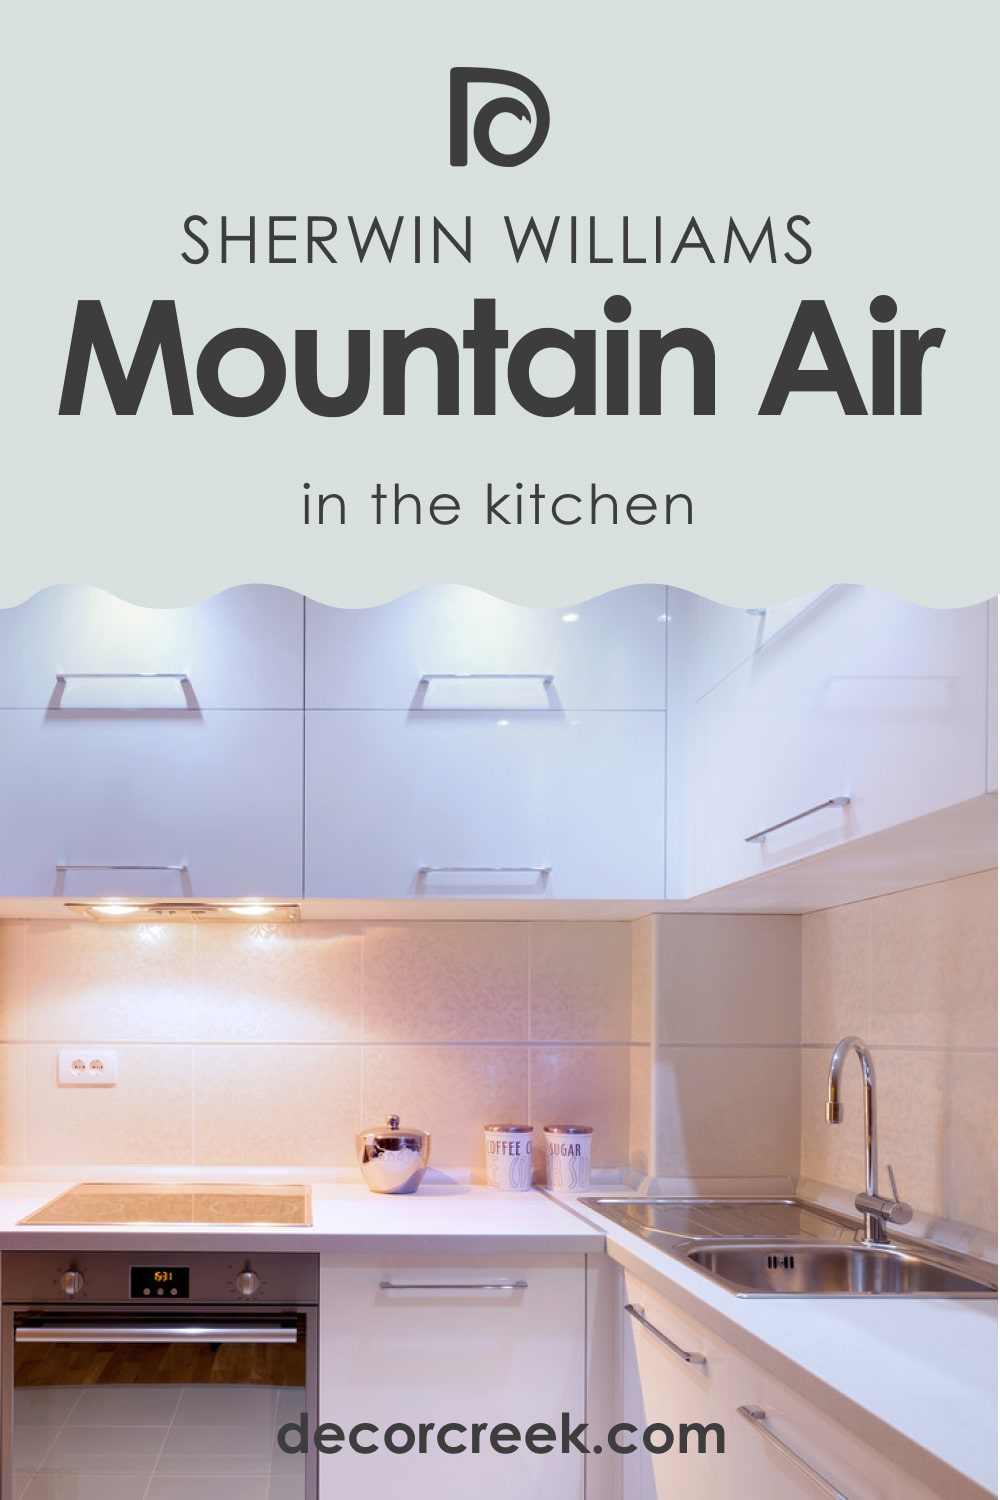 SW Mountain Air for the Kitchen